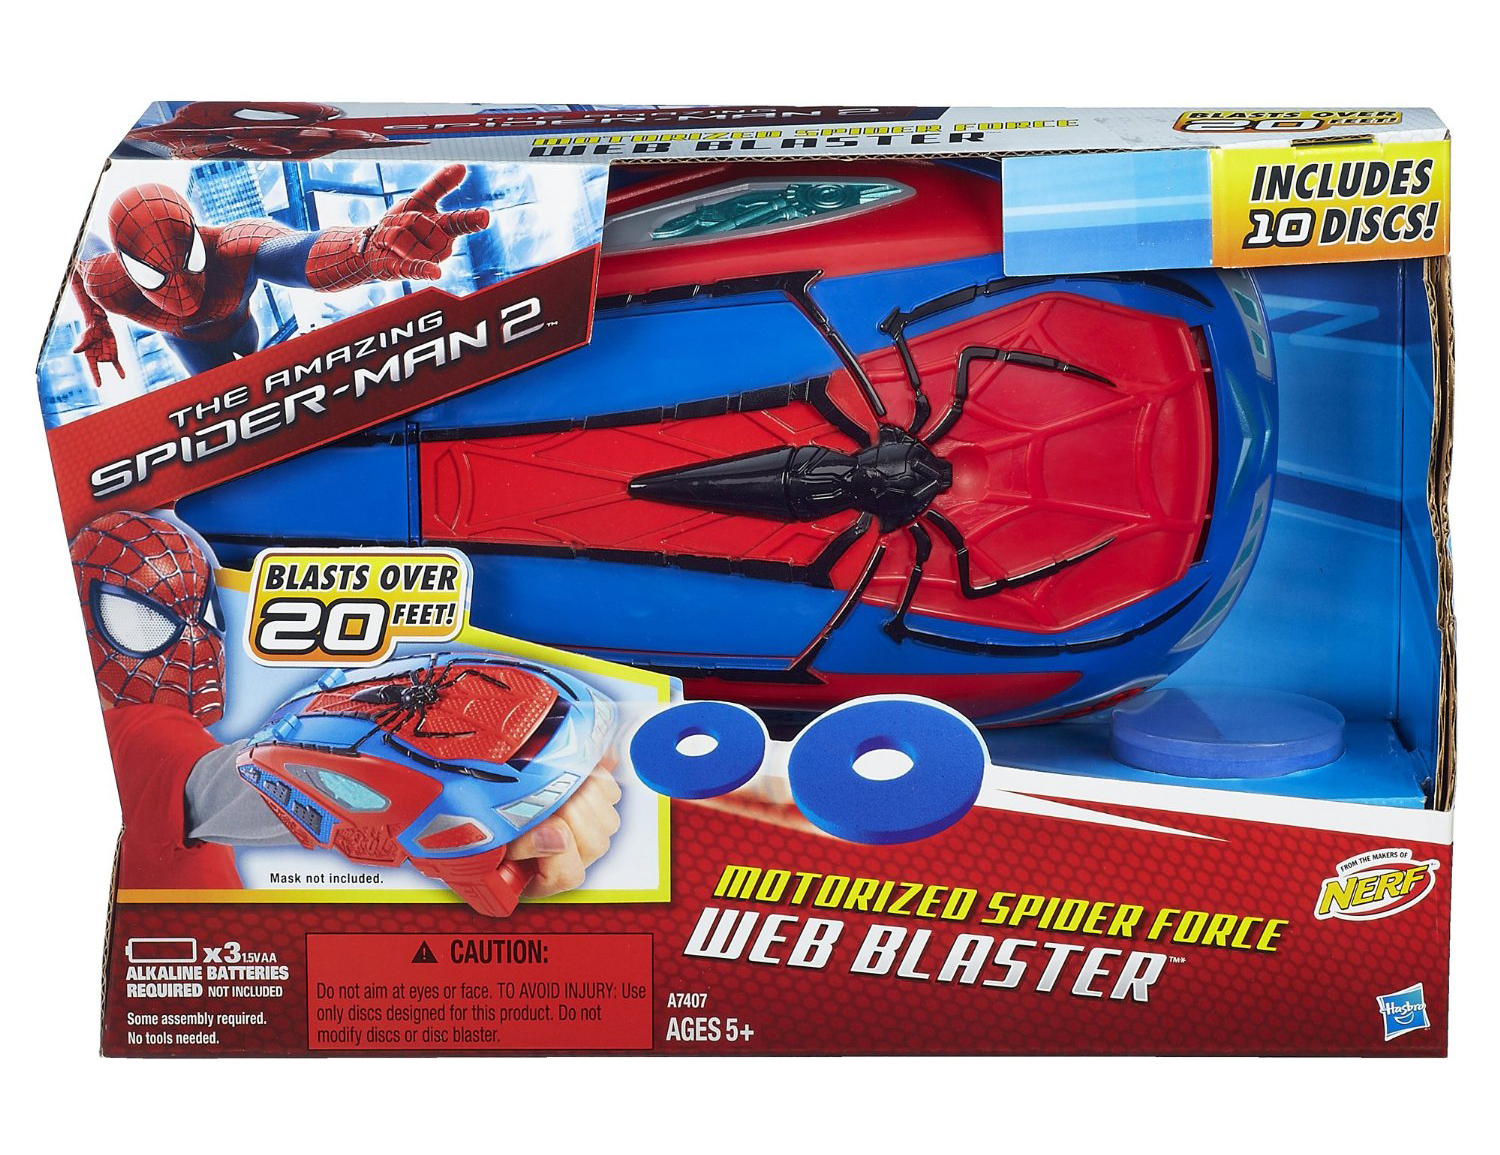 The Coolest Spiderman Toys You Can Get for Your Children